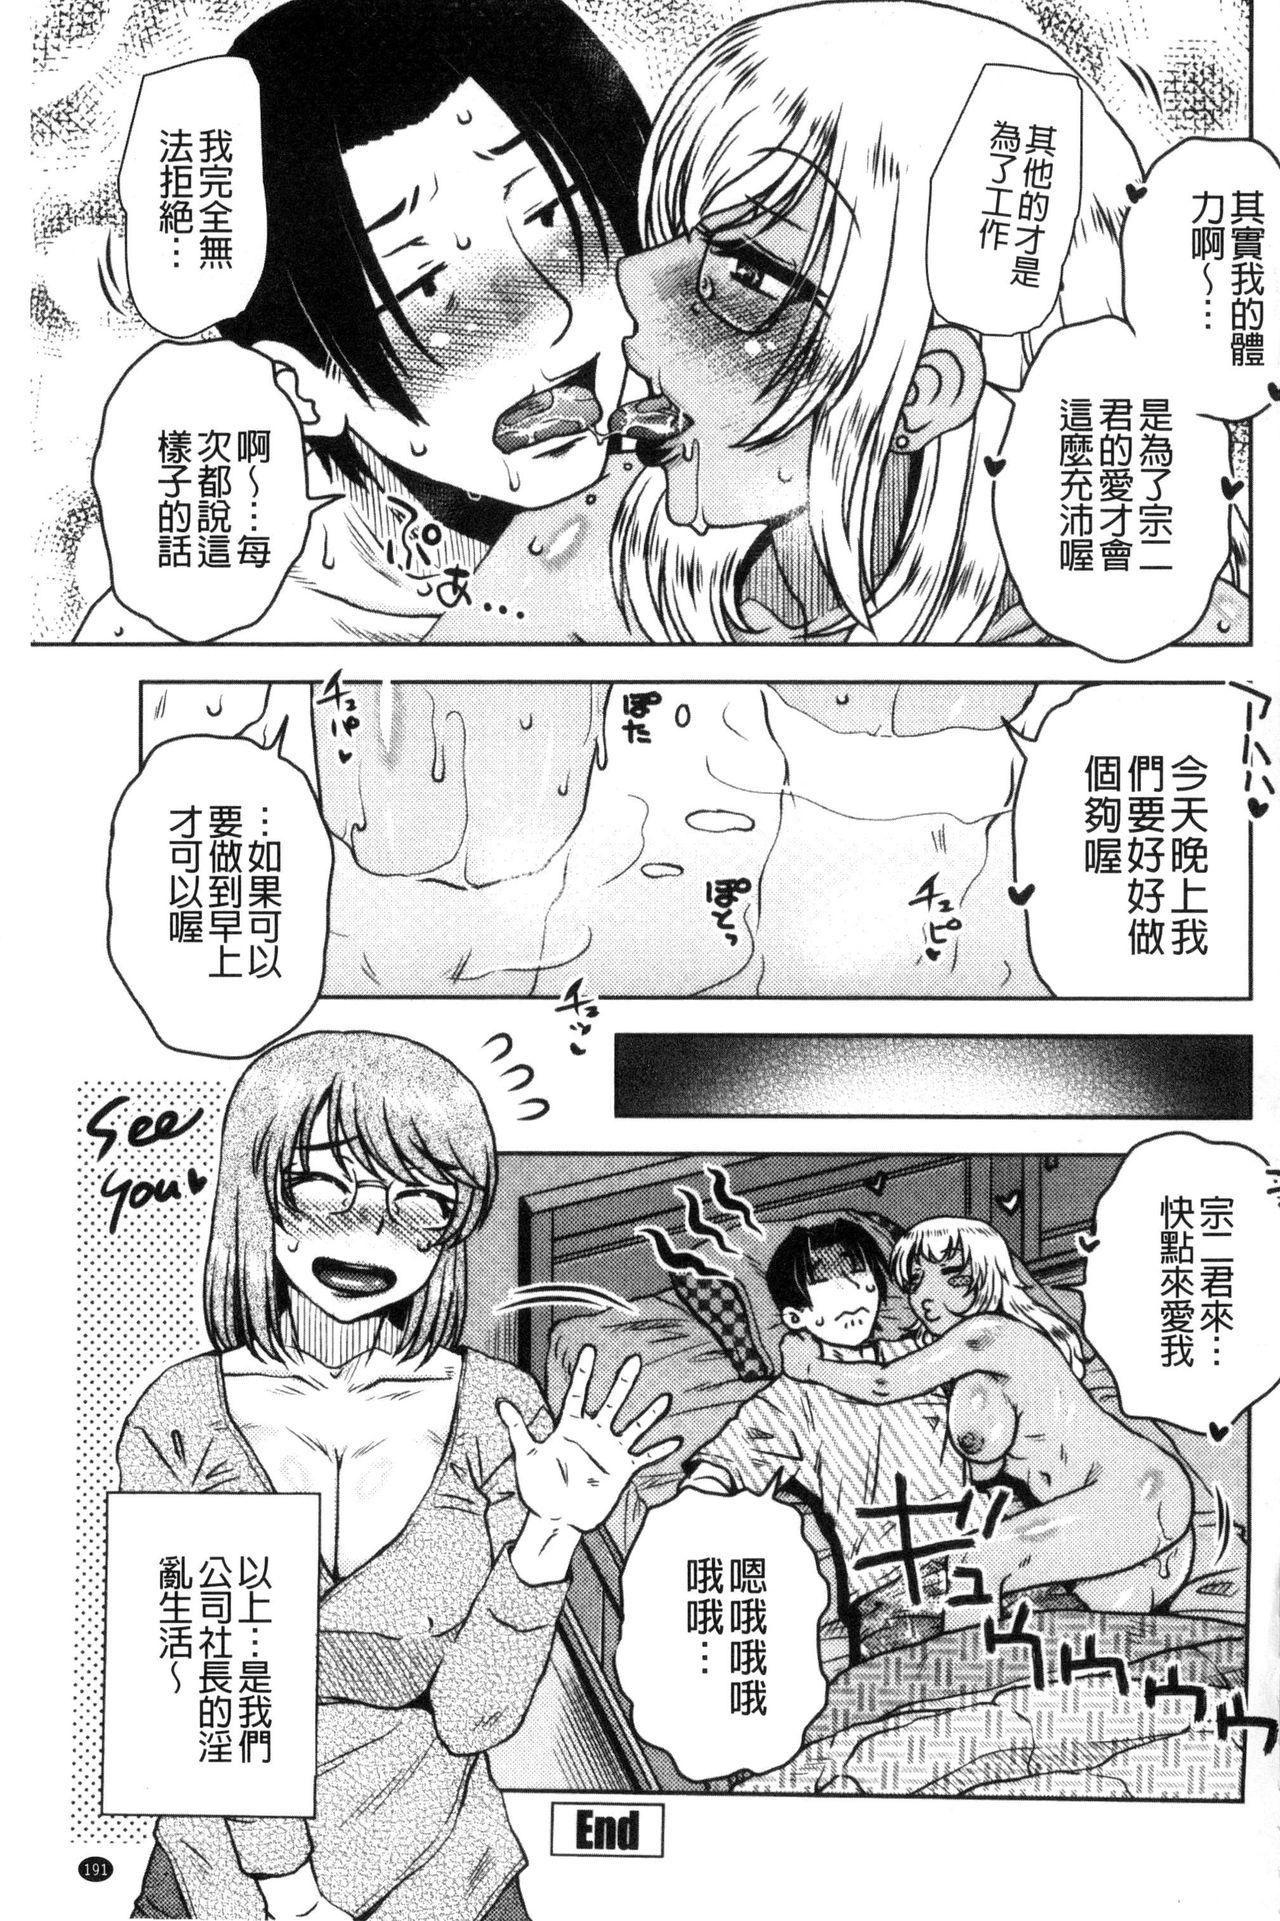 Young Tits [Kurumiya Mashimin] Uchi no Shachou no Hamedere Inkatsu - Our President is HAME-DERE in Licentious sex life. [Chinese] Wetpussy - Page 196